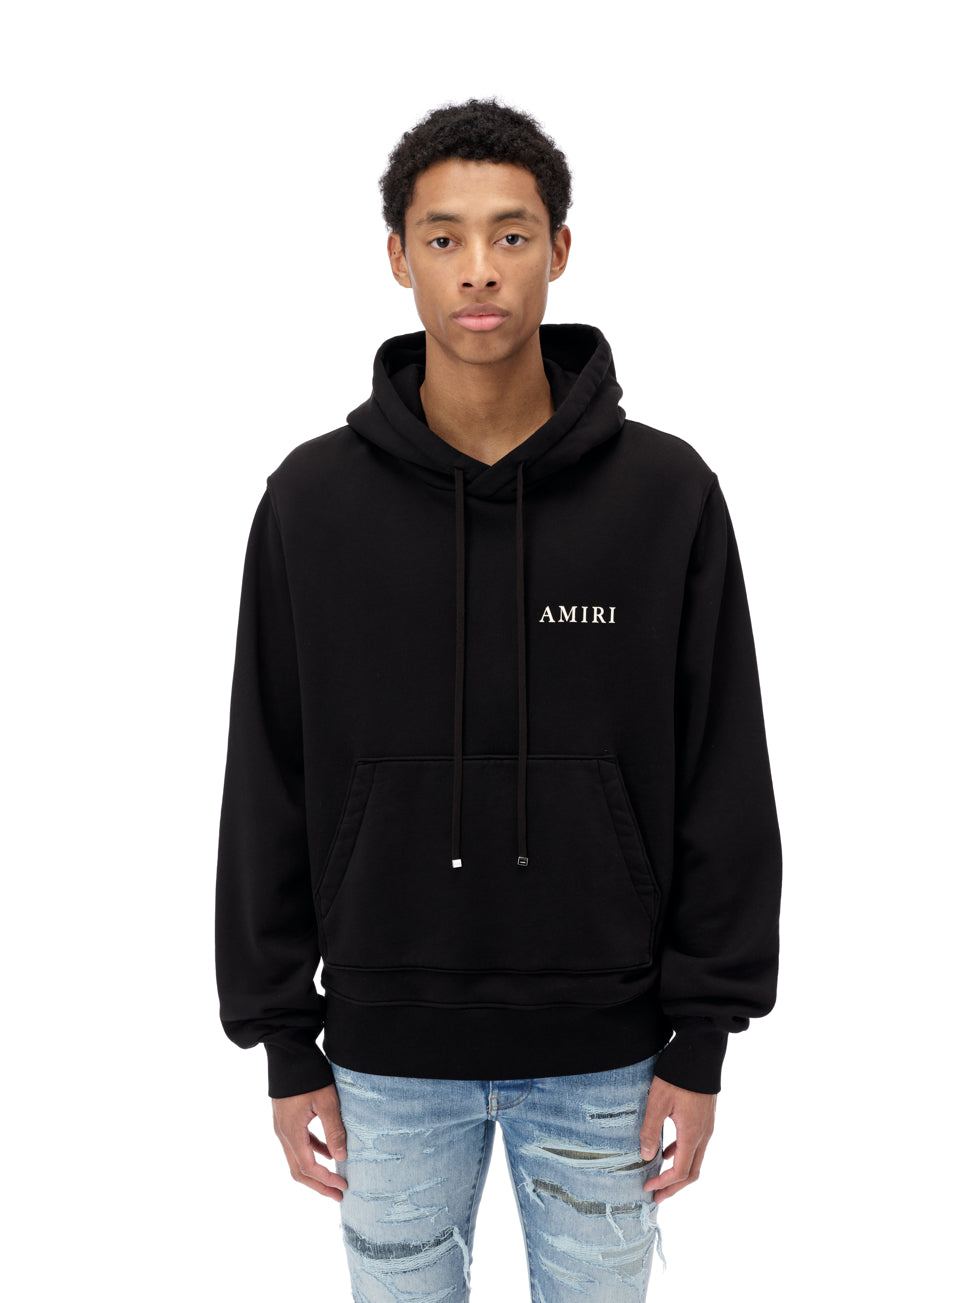 Amiri Paint Drip Embroidered Hoodie! Available in All Colours & Sizes.